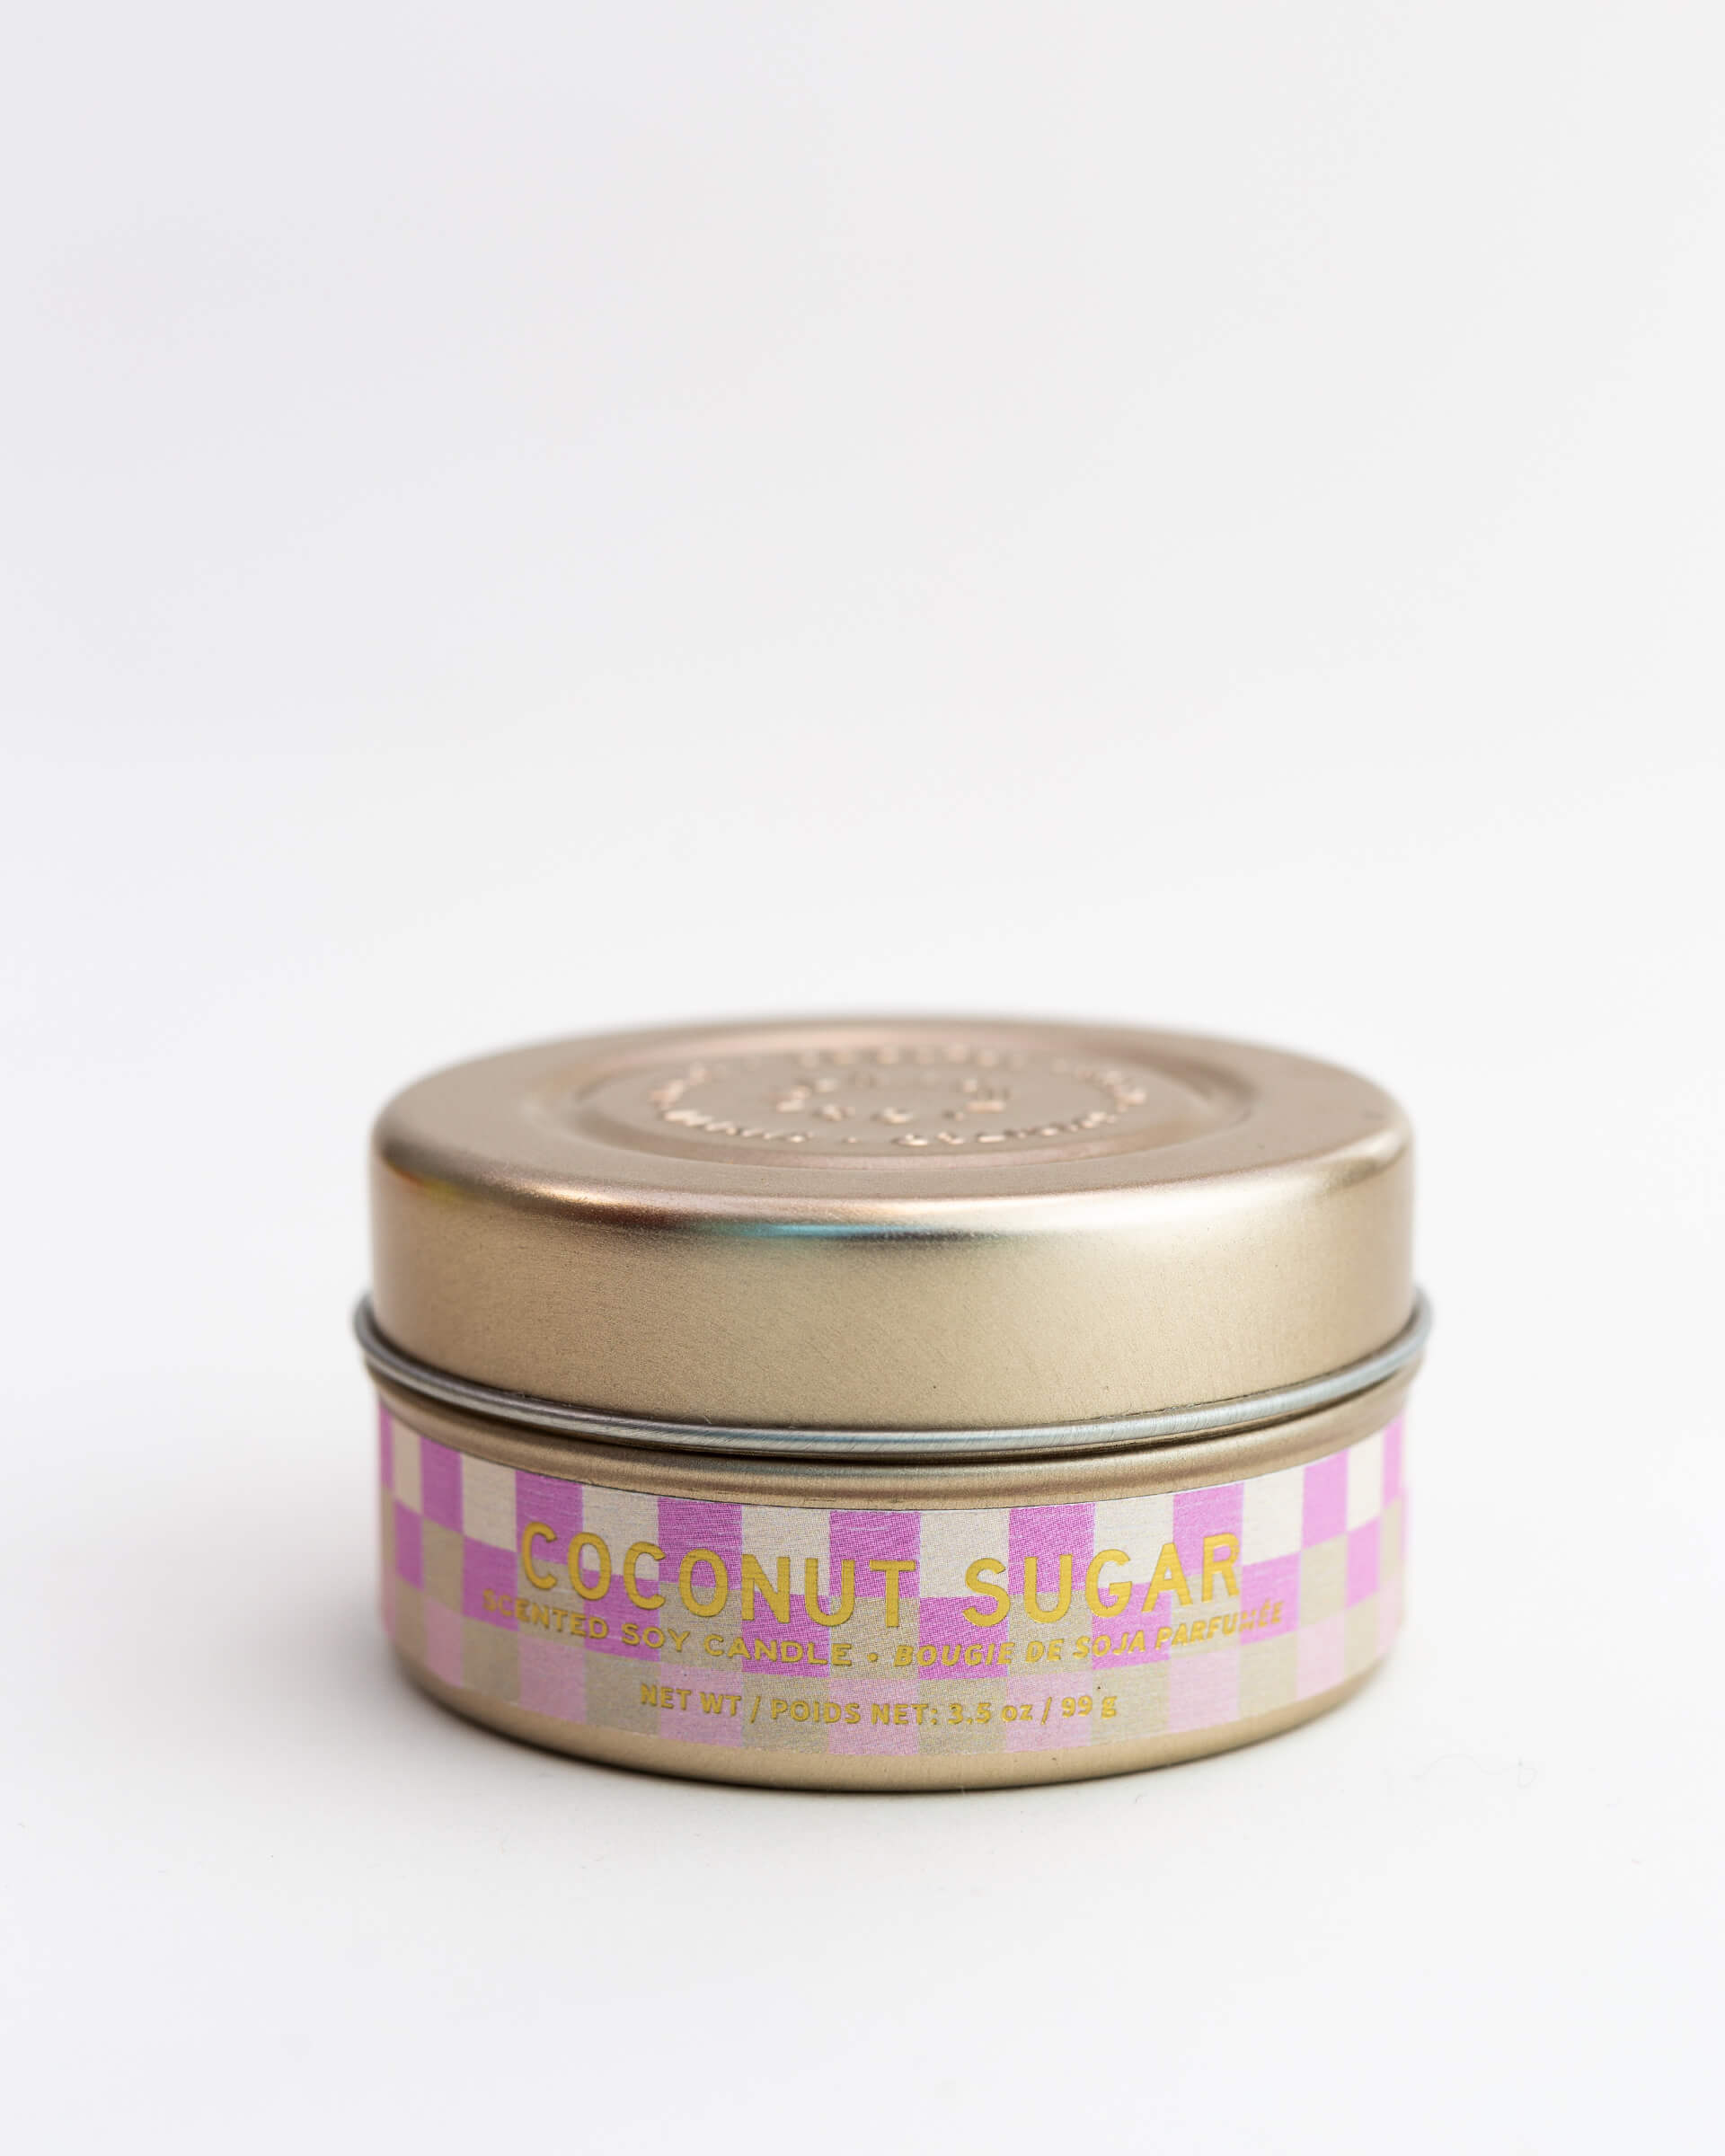 pink and white checkered 3 oz tin coconut sugar candle on a white background